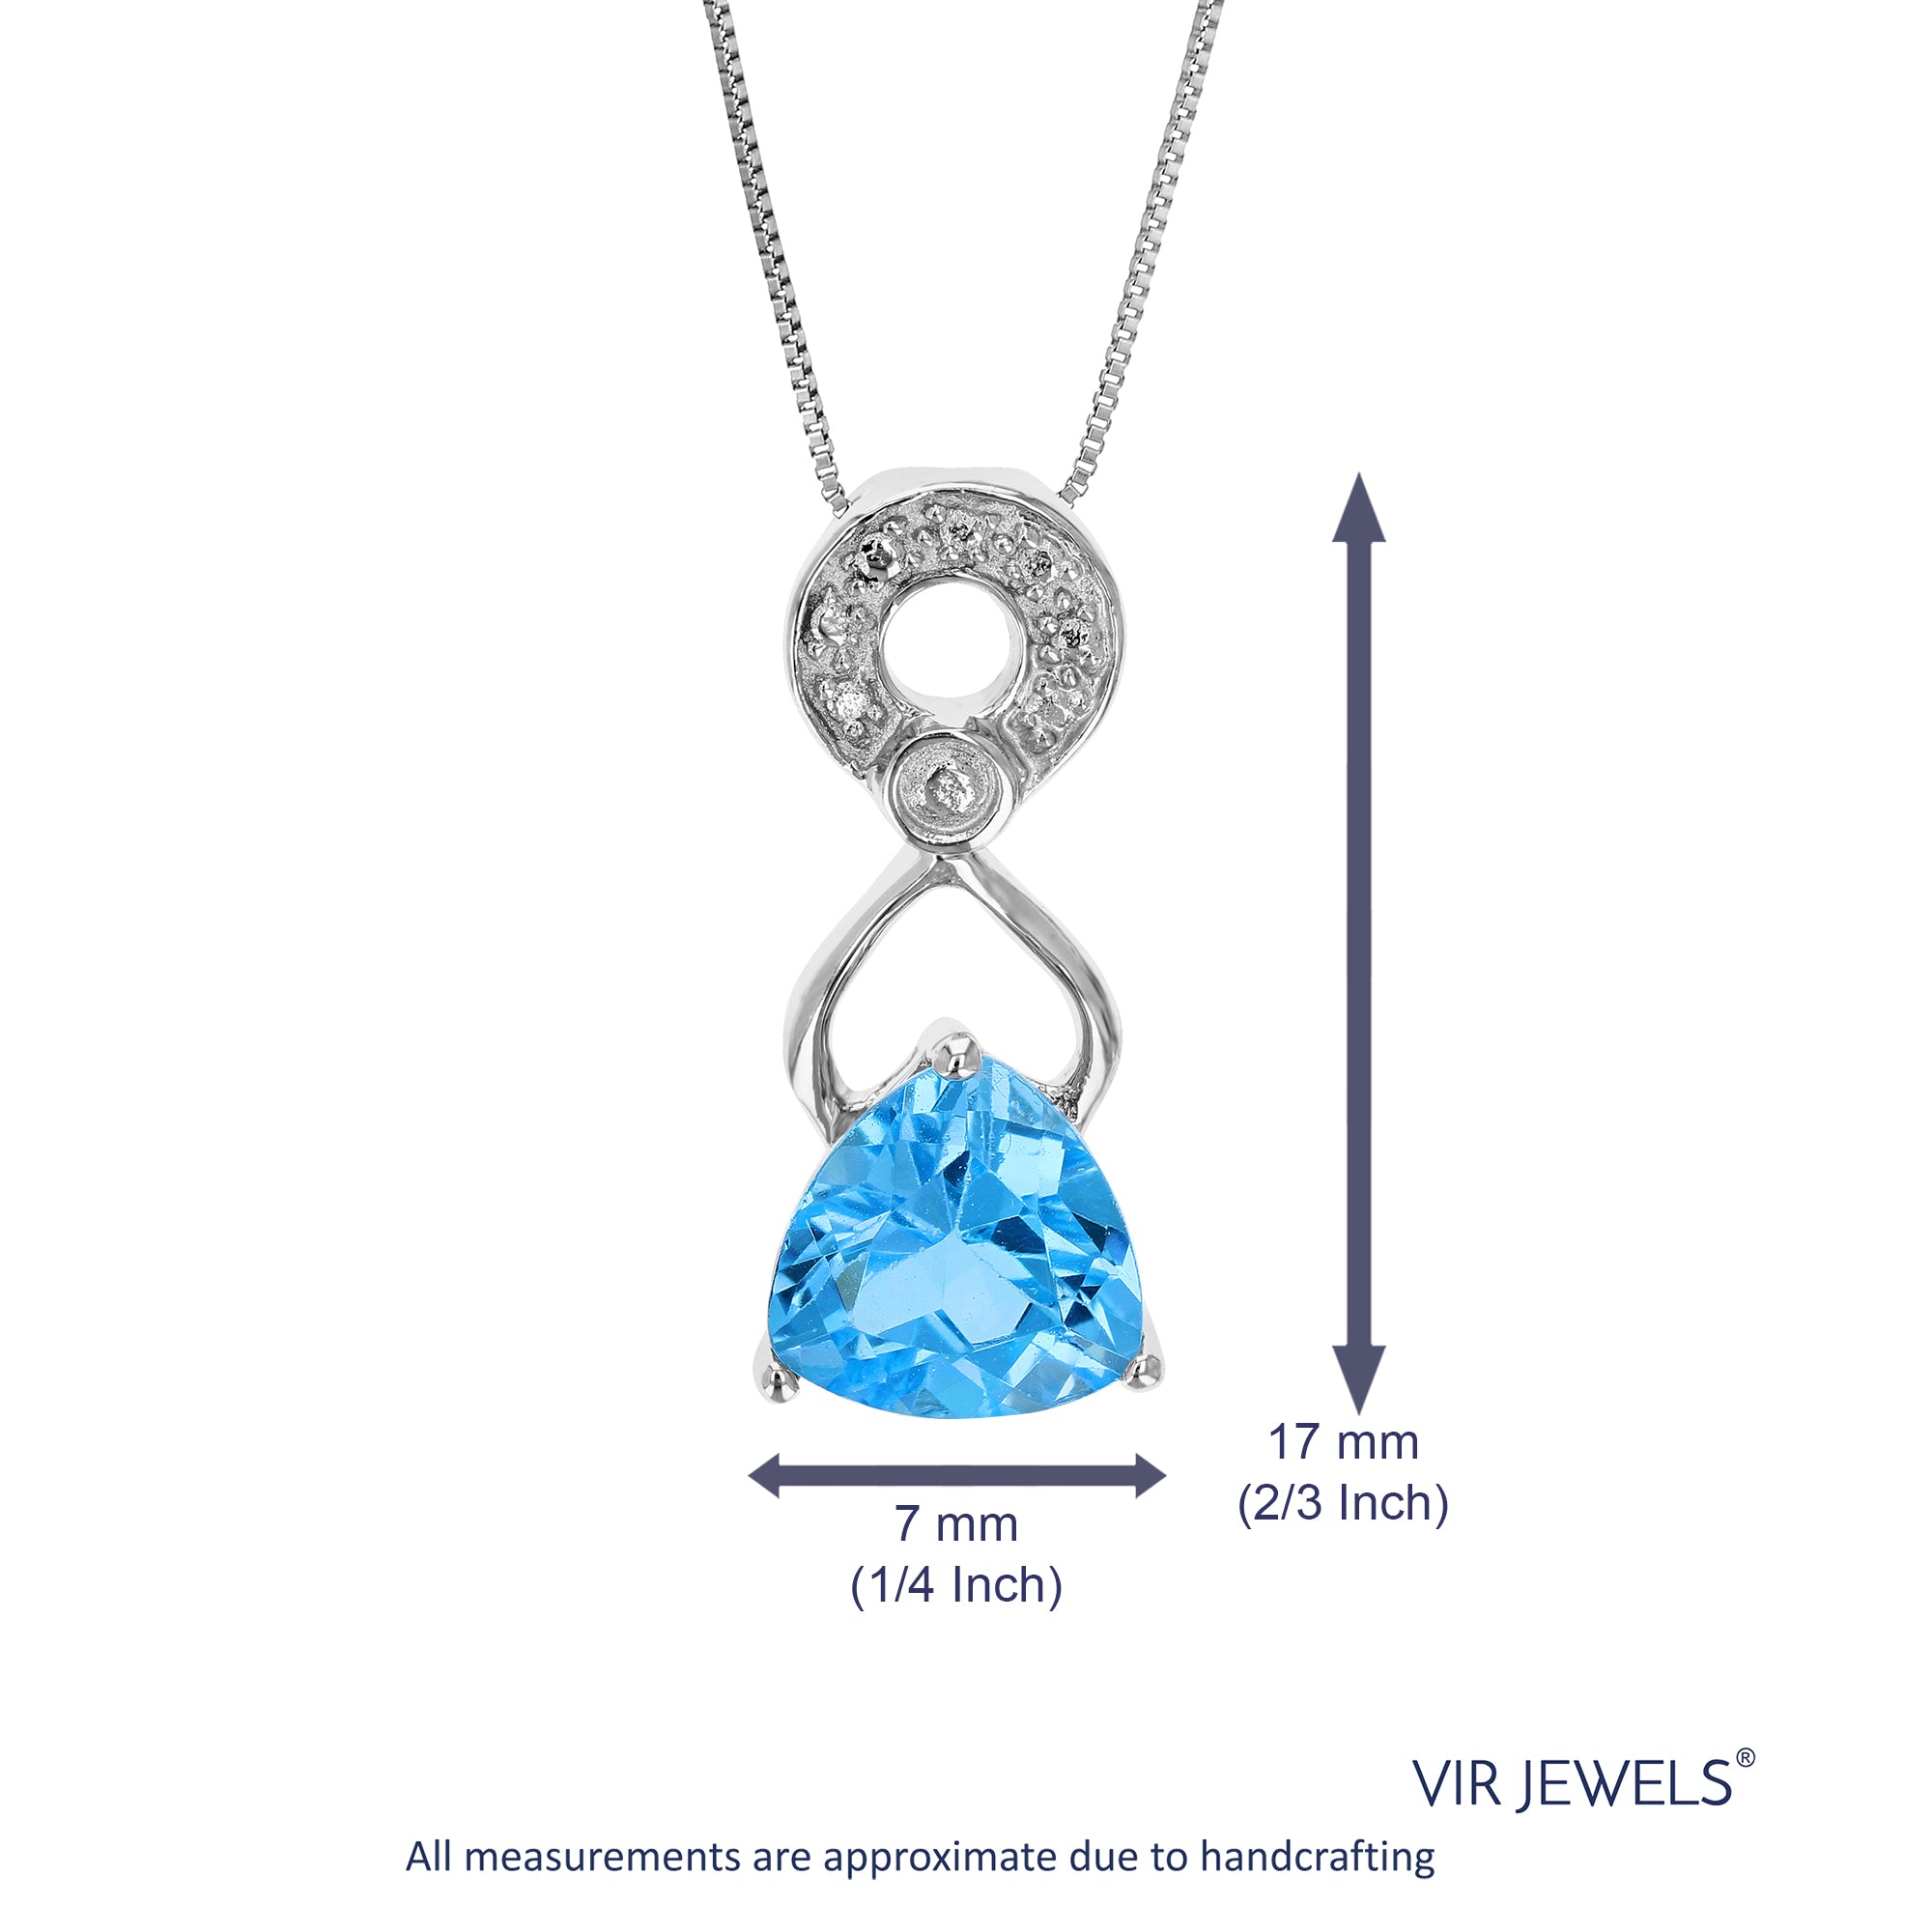 1 cttw Pendant Necklace, Swiss Blue Topaz Trillion Shape Pendant Necklace for Women in .925 Sterling Silver with Rhodium, 18 Inch Chain, Prong Setting